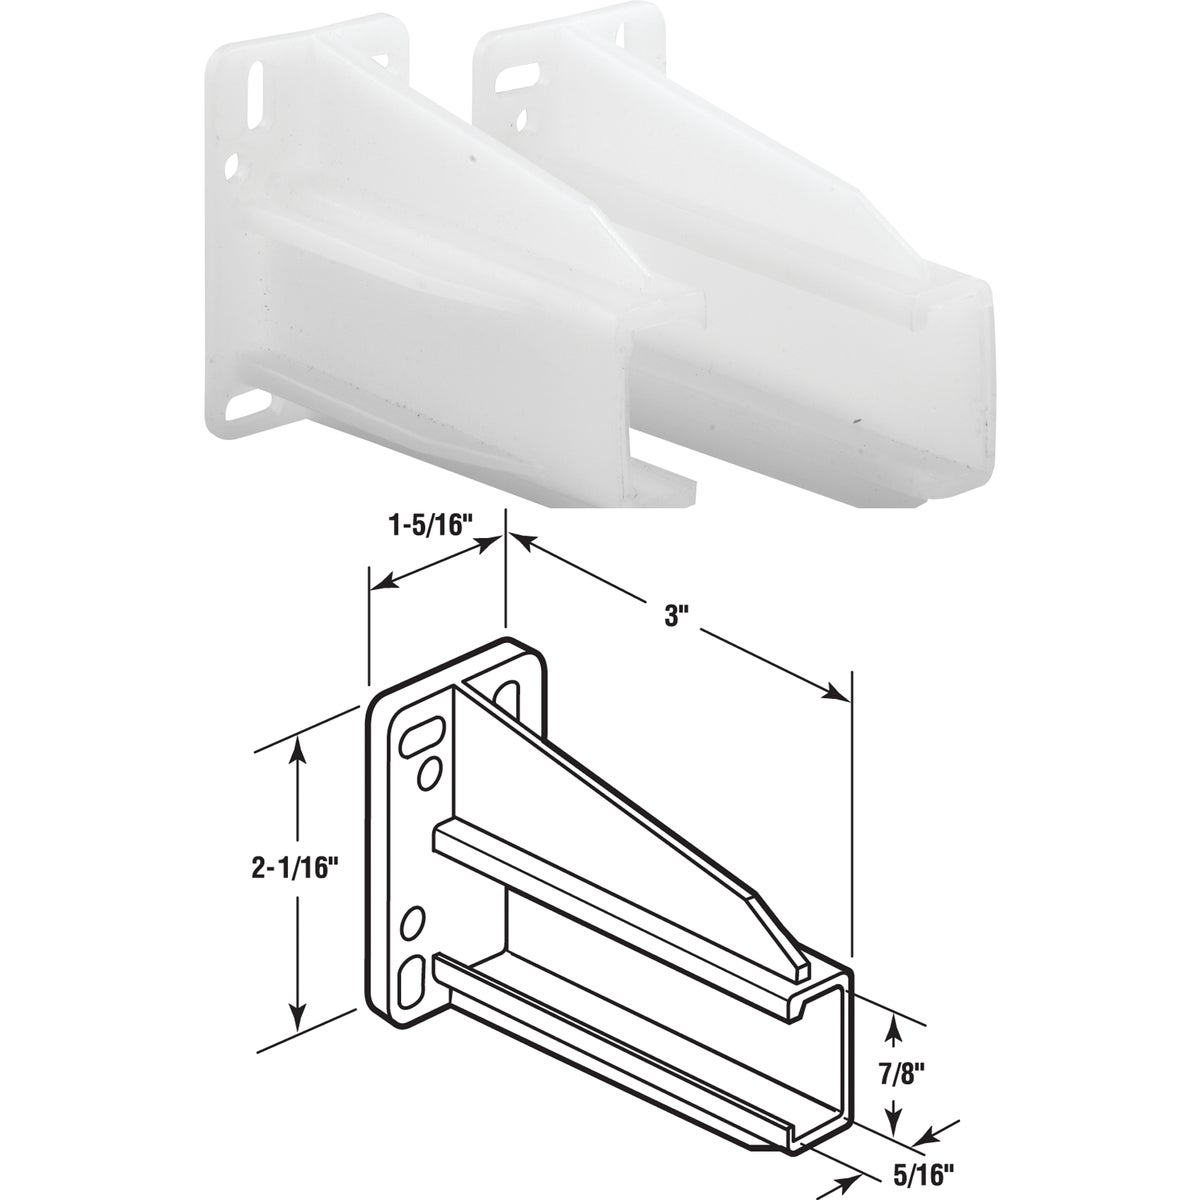 Item 200281, Support bracket for side mounted, steel ball bearing drawer glides mounts 